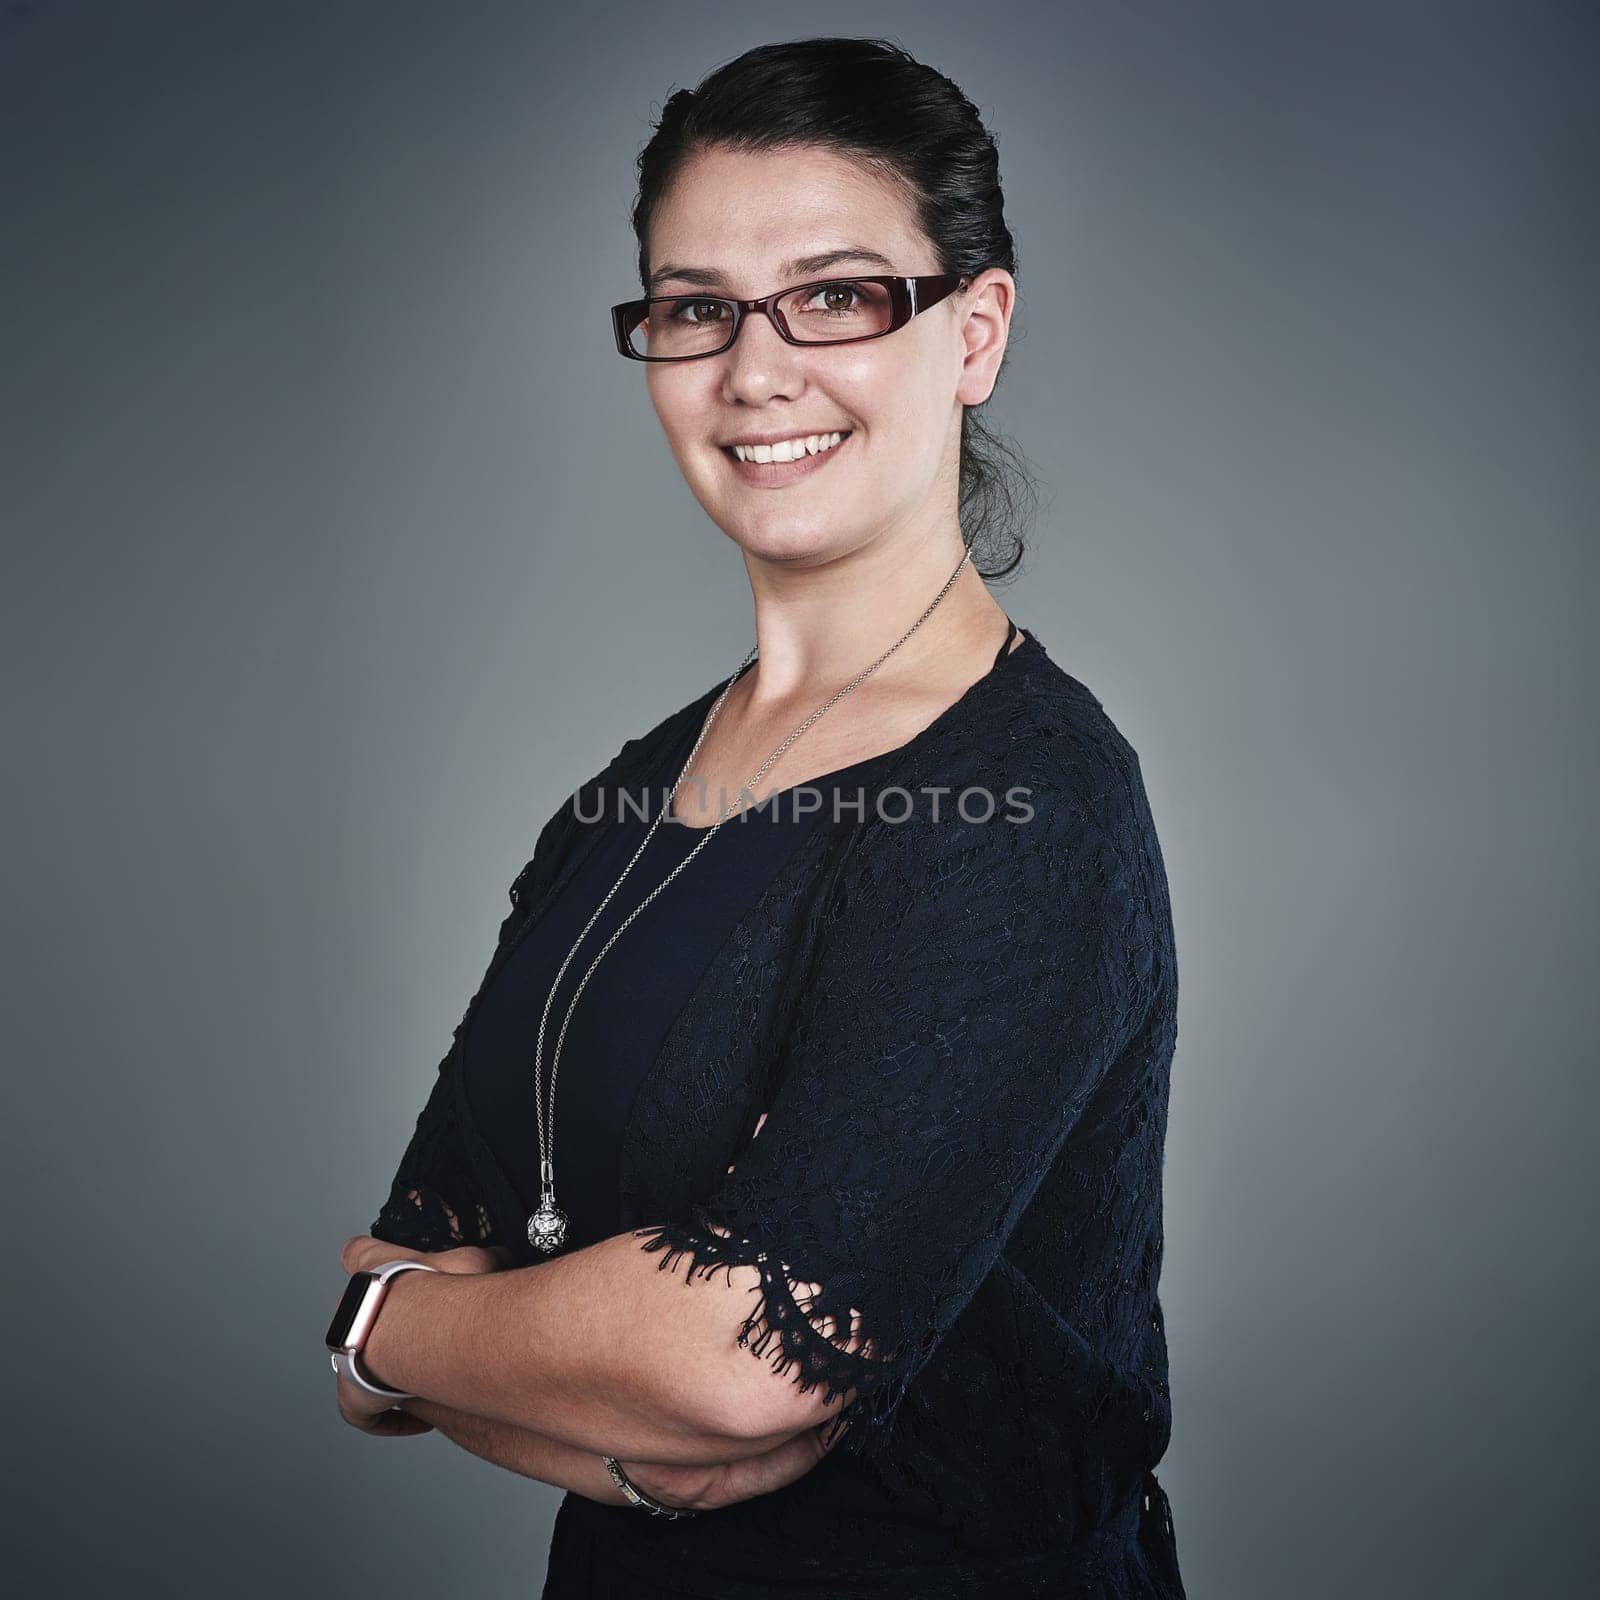 Hard work is the key to success. Studio portrait of a confident young businesswoman posing against a grey background